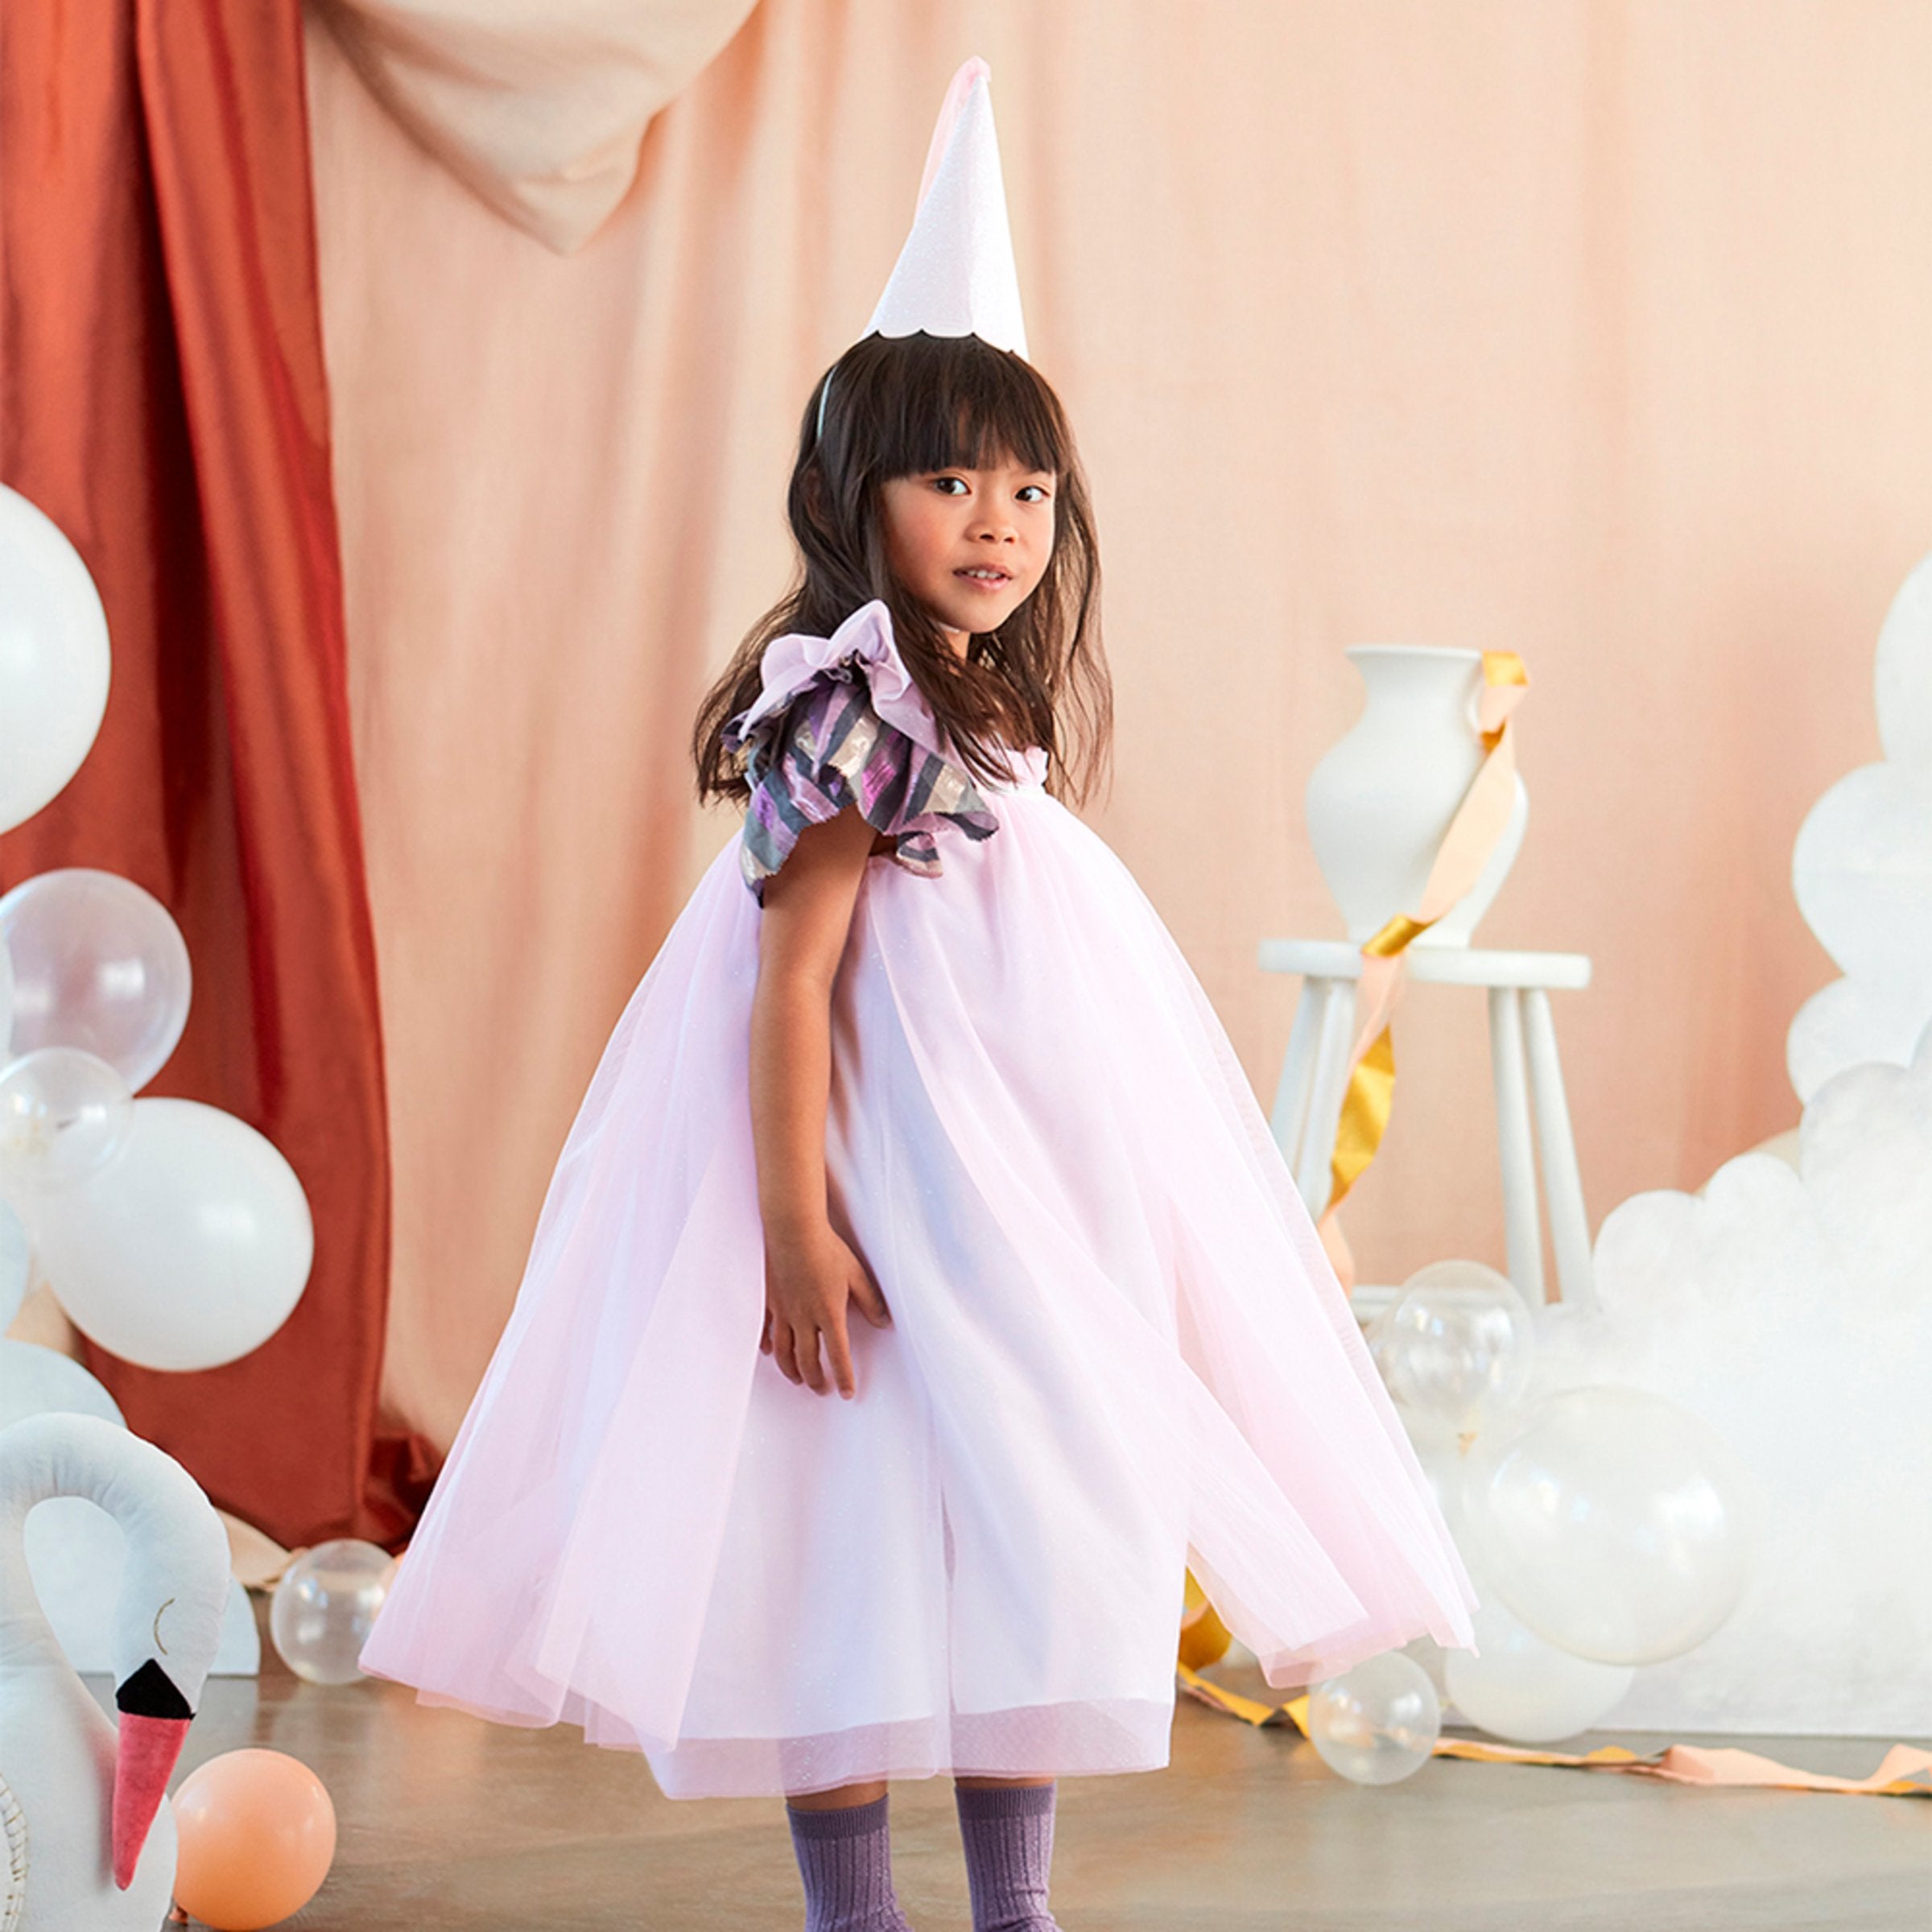 This costume, with a princess dress and hat with tassels, is perfect for a princess party.